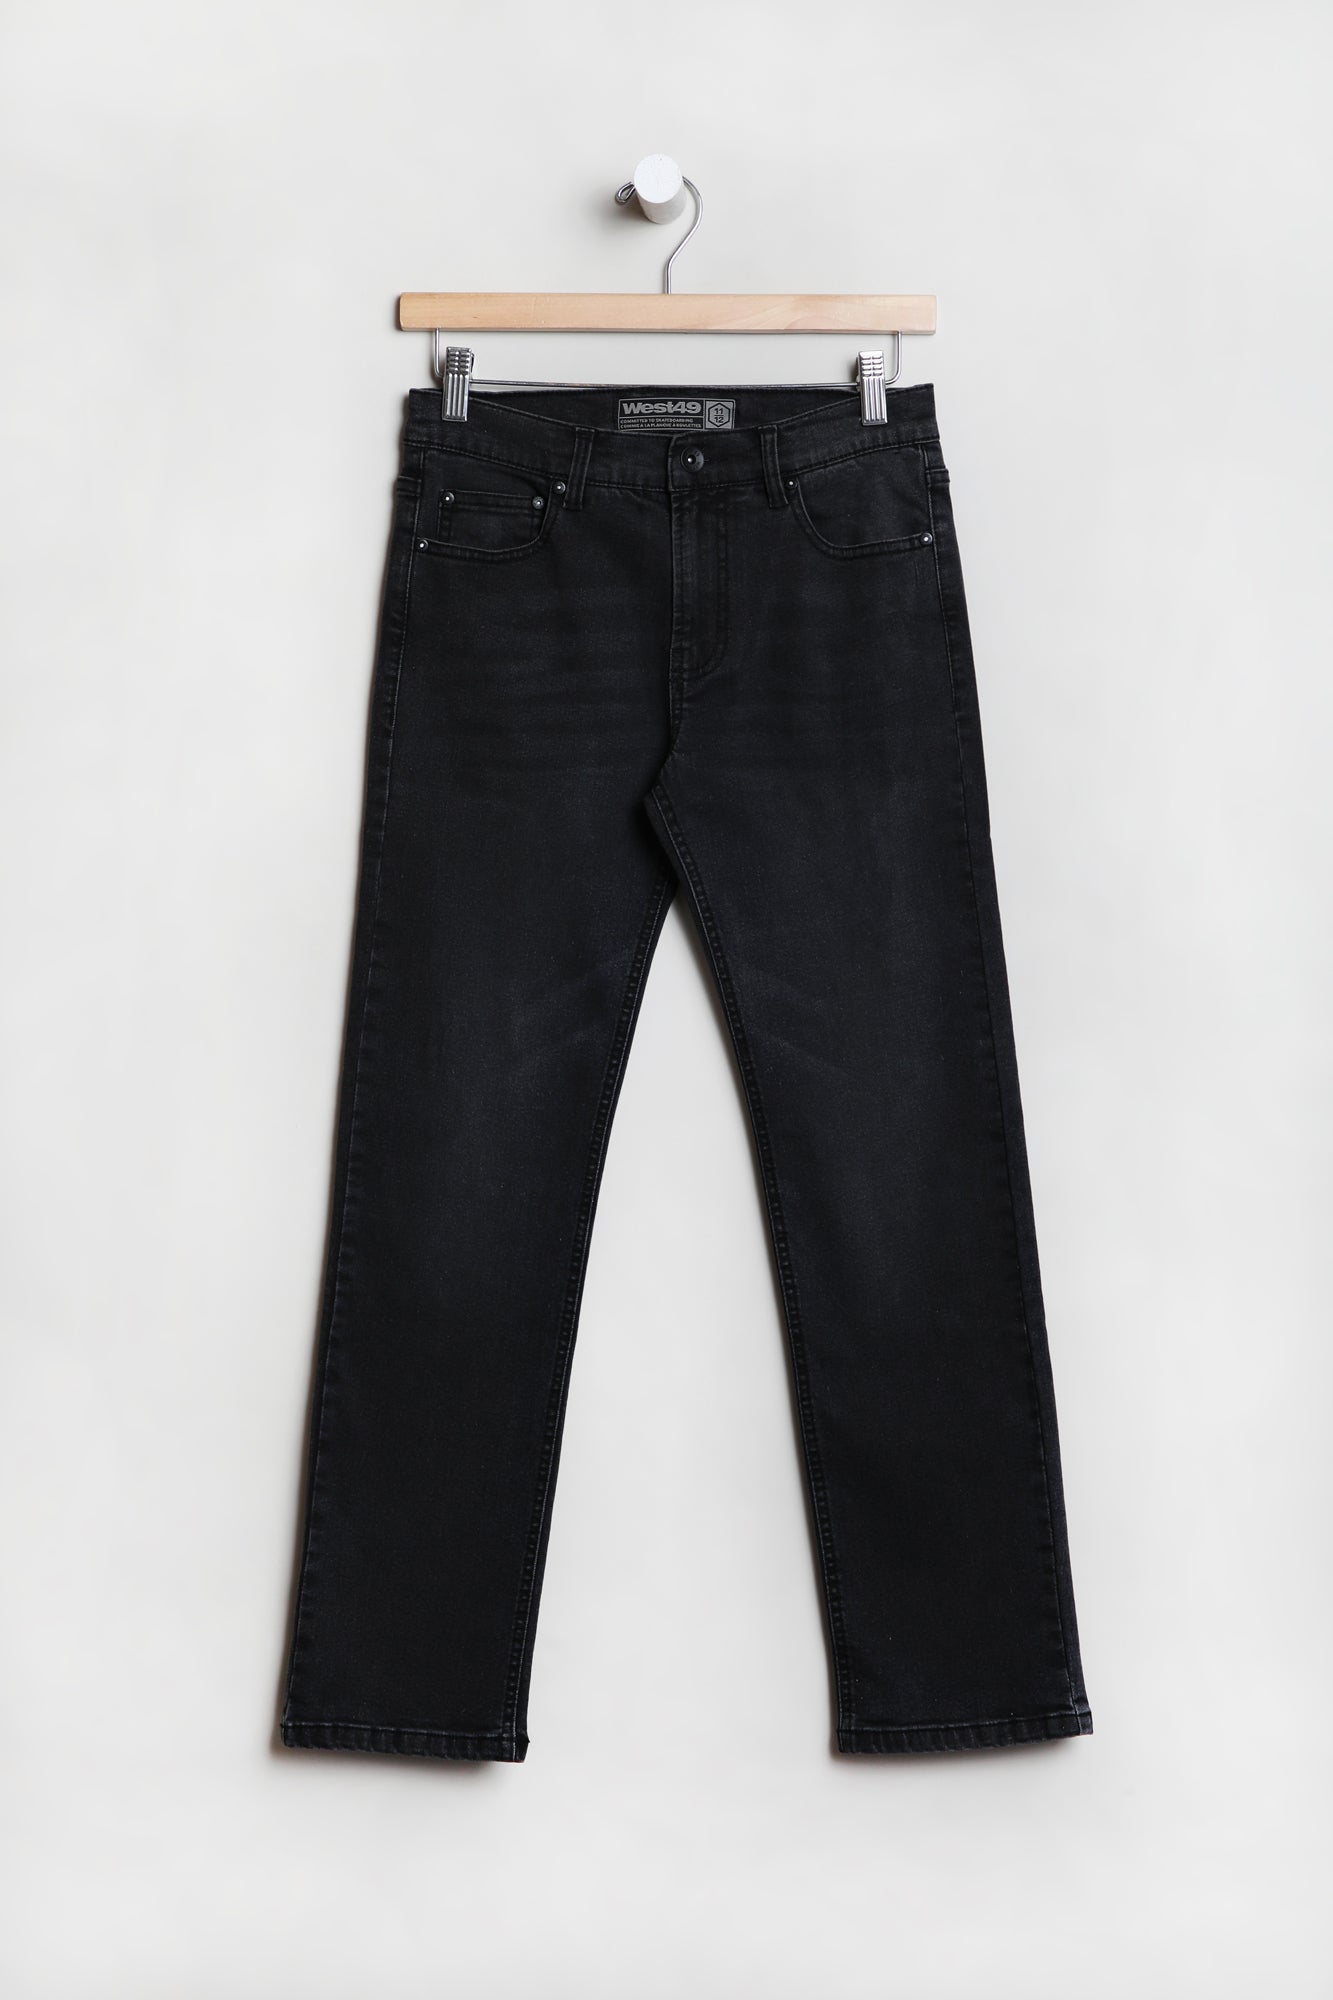 West49 Youth Washed Black Slim Jean - Charcoal /